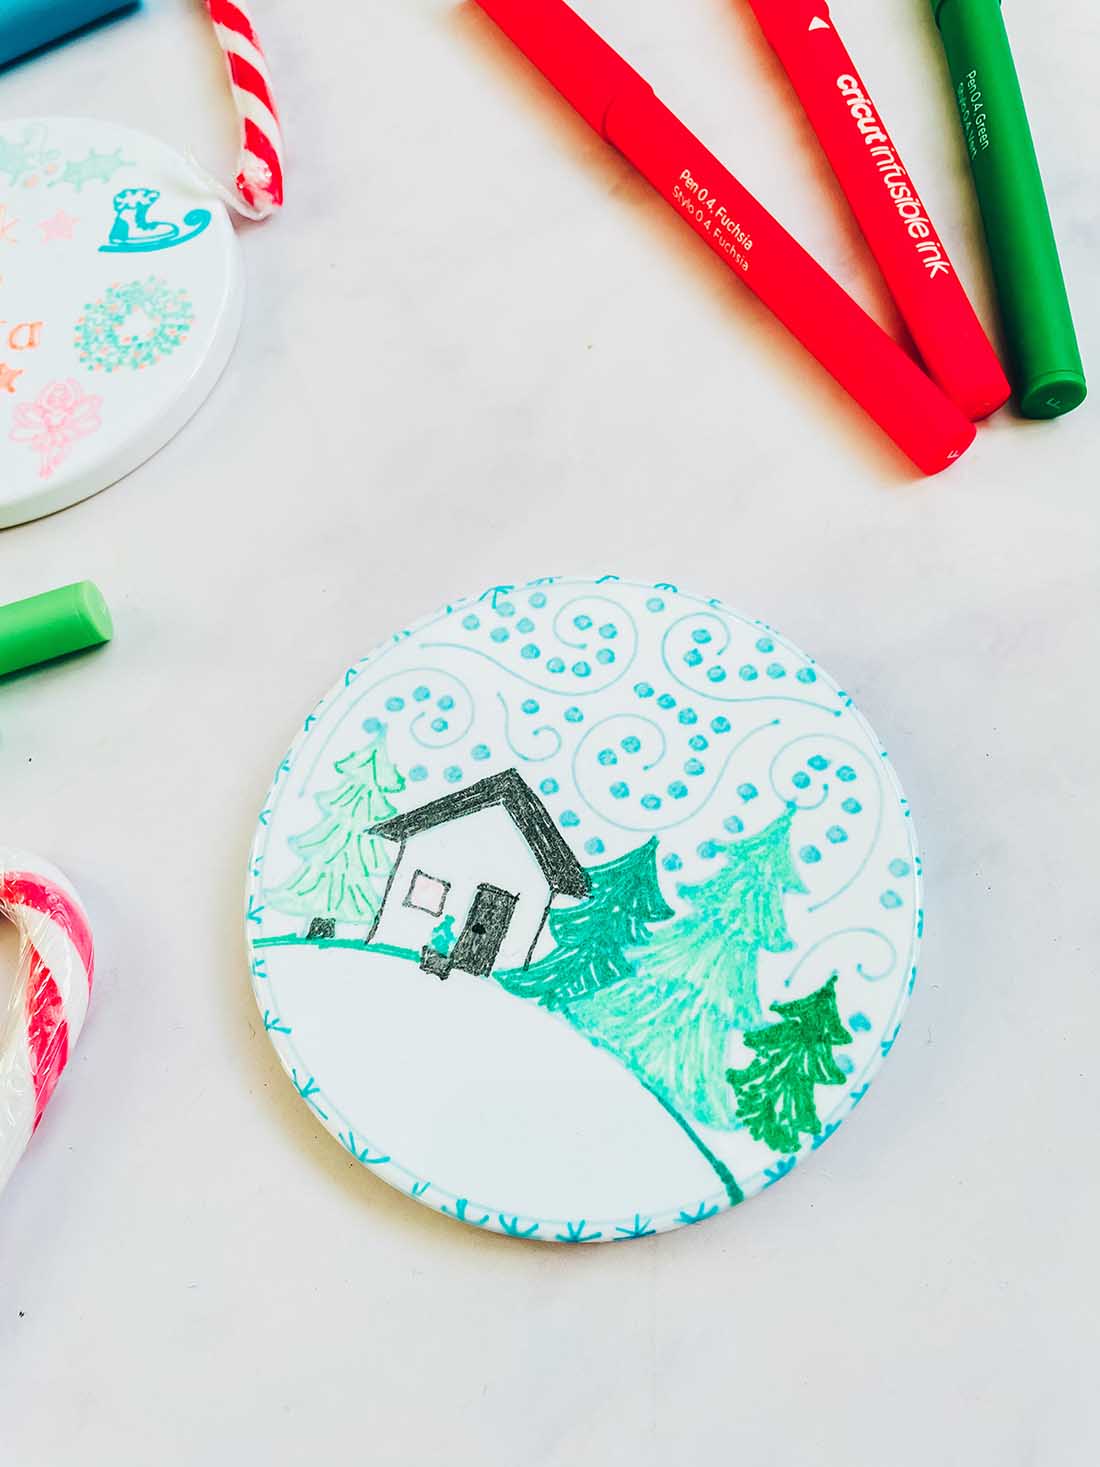 How to create coasters with Infusible ink pens